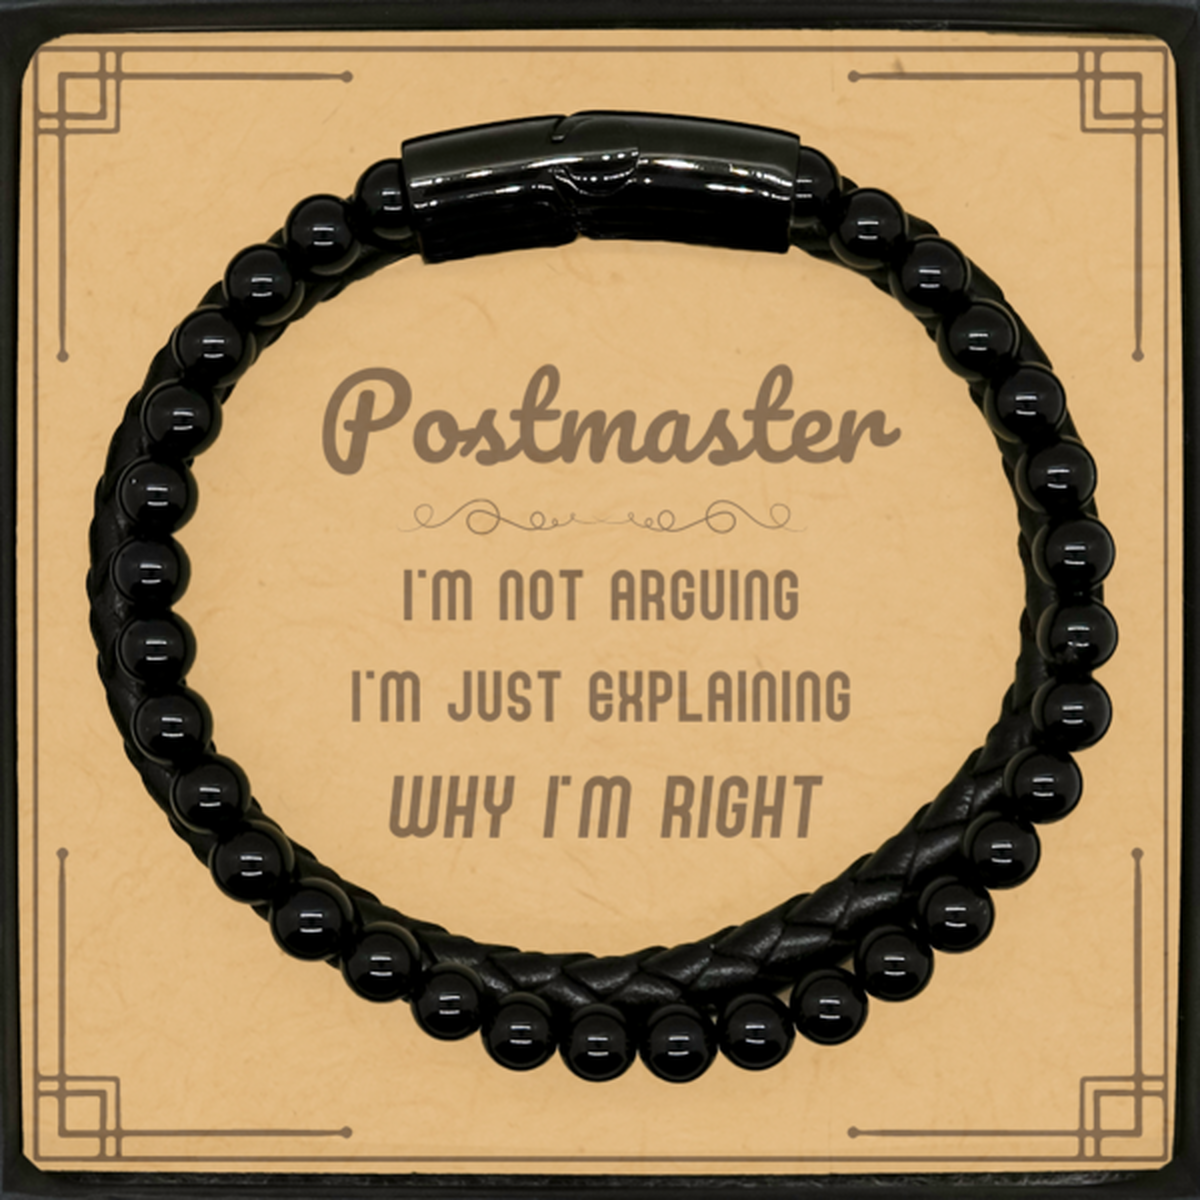 Postmaster I'm not Arguing. I'm Just Explaining Why I'm RIGHT Stone Leather Bracelets, Funny Saying Quote Postmaster Gifts For Postmaster Message Card Graduation Birthday Christmas Gifts for Men Women Coworker